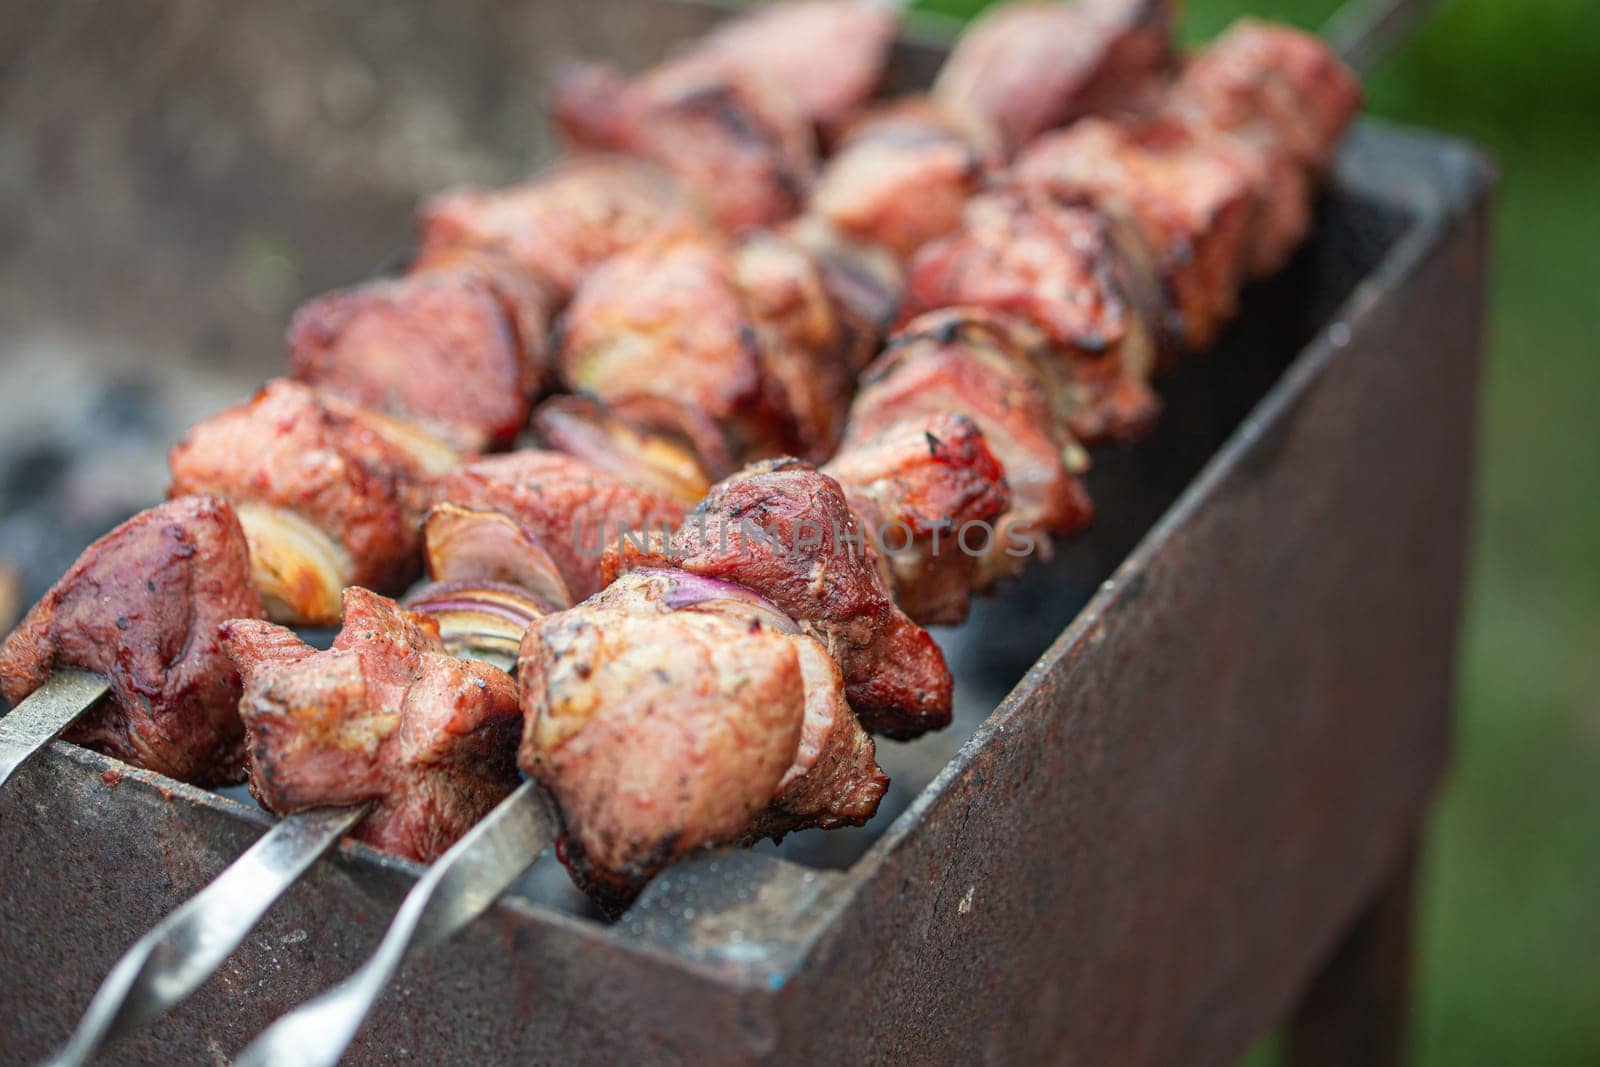 Outdoor picnic with grilling fresh meat shish kebab (shashlik) on a steel skewers on a grill wood coal. BBQ on summer picnic in green garden by its_al_dente